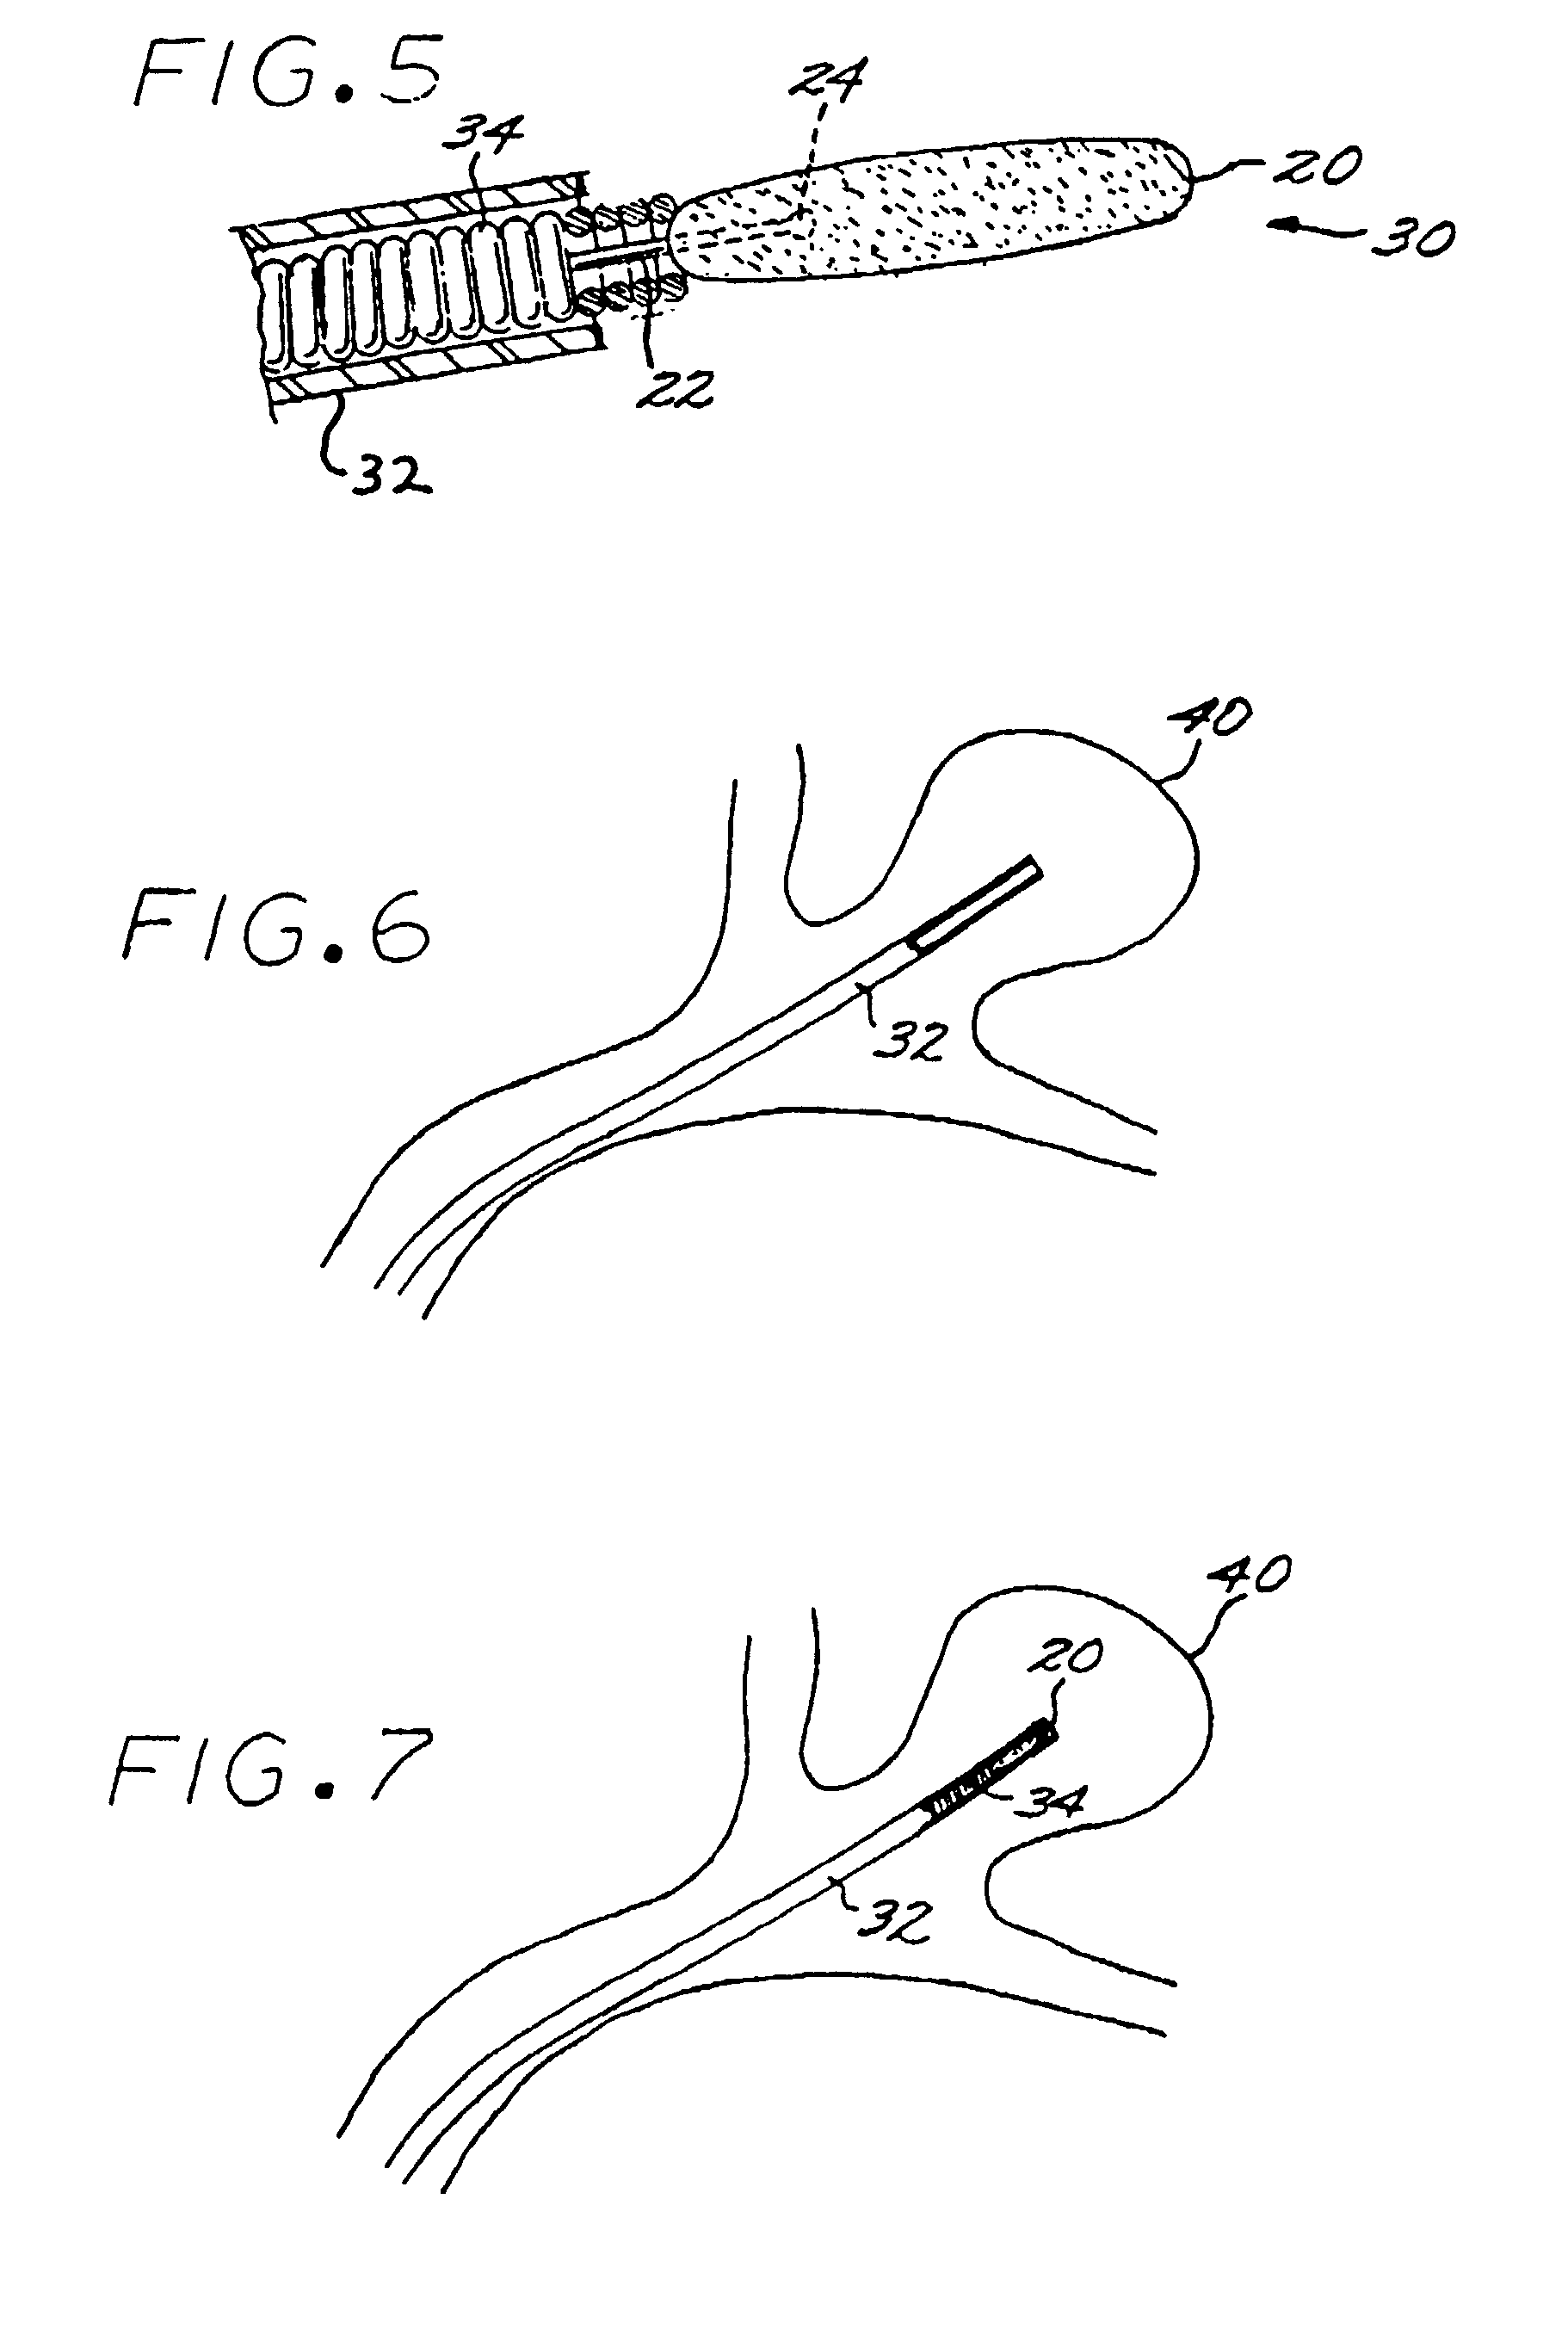 Vascular embolization with an expansible implant